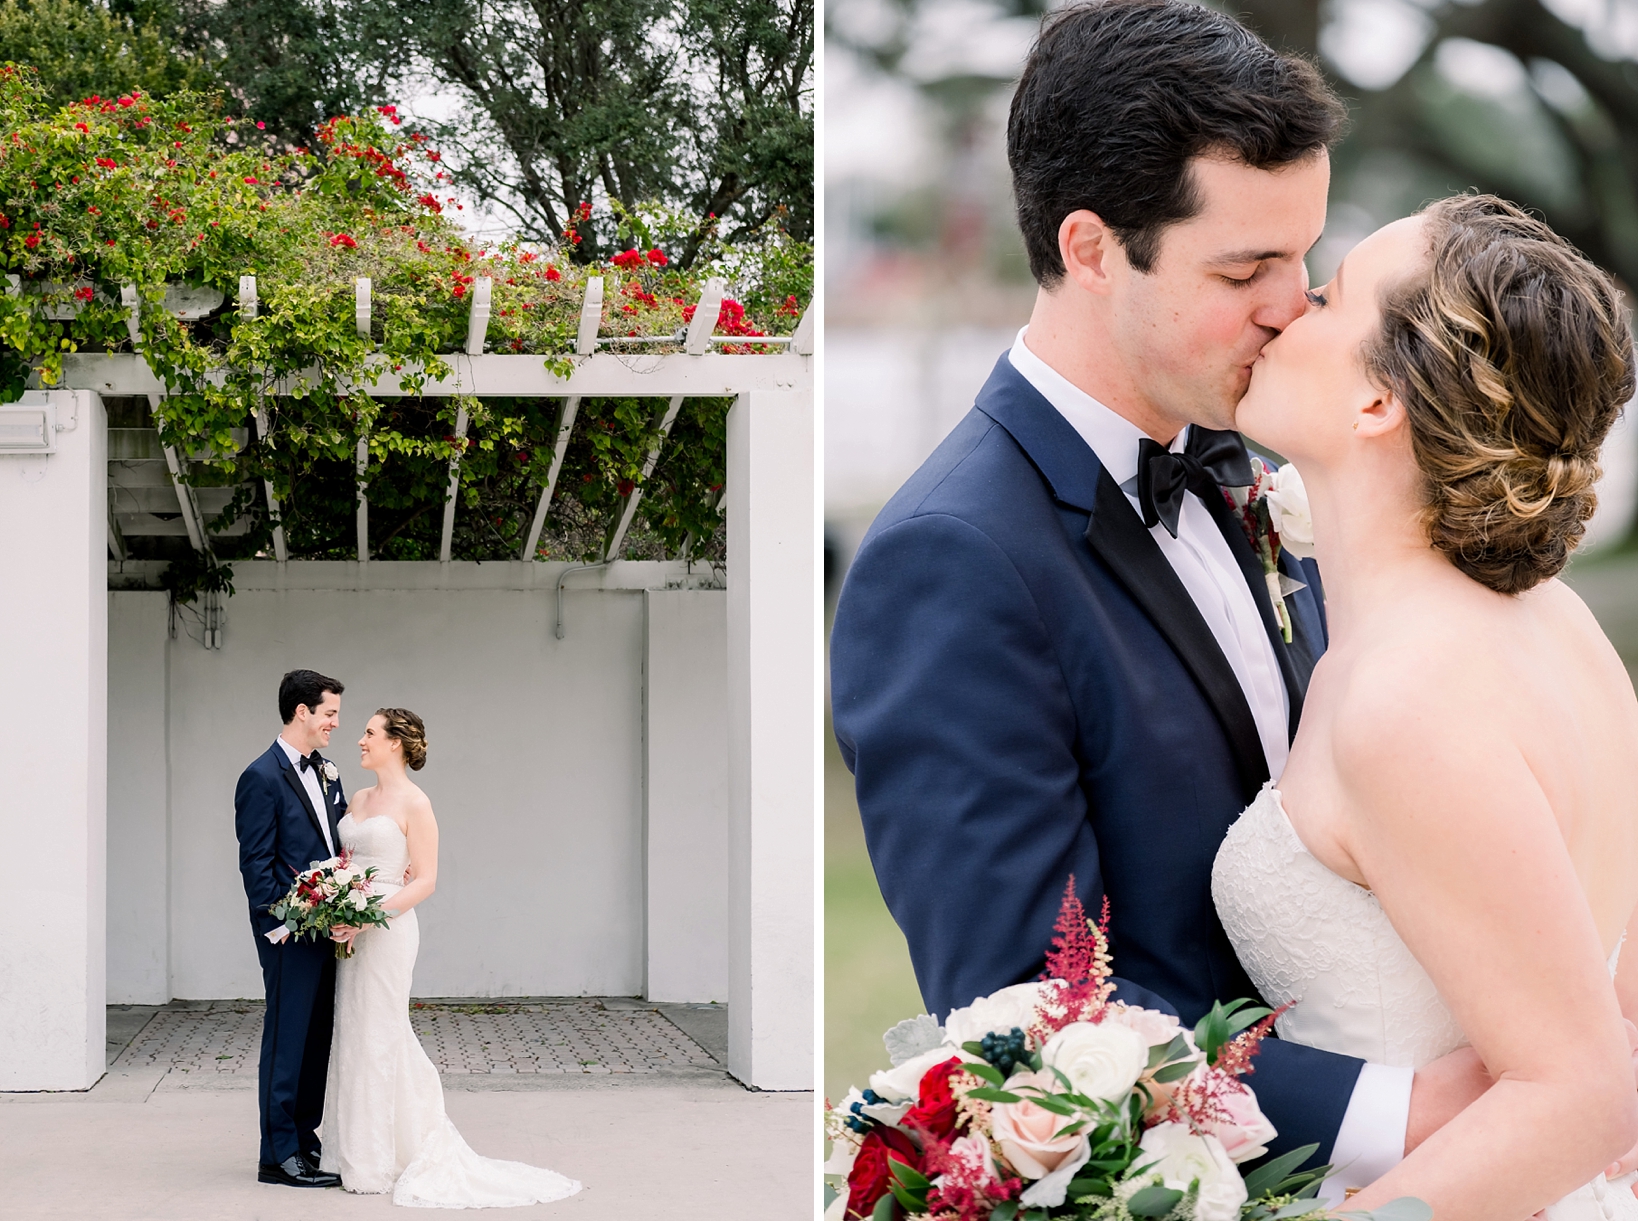 The Bride and Groom share a kiss and a first look by Sarah & Ben Photography